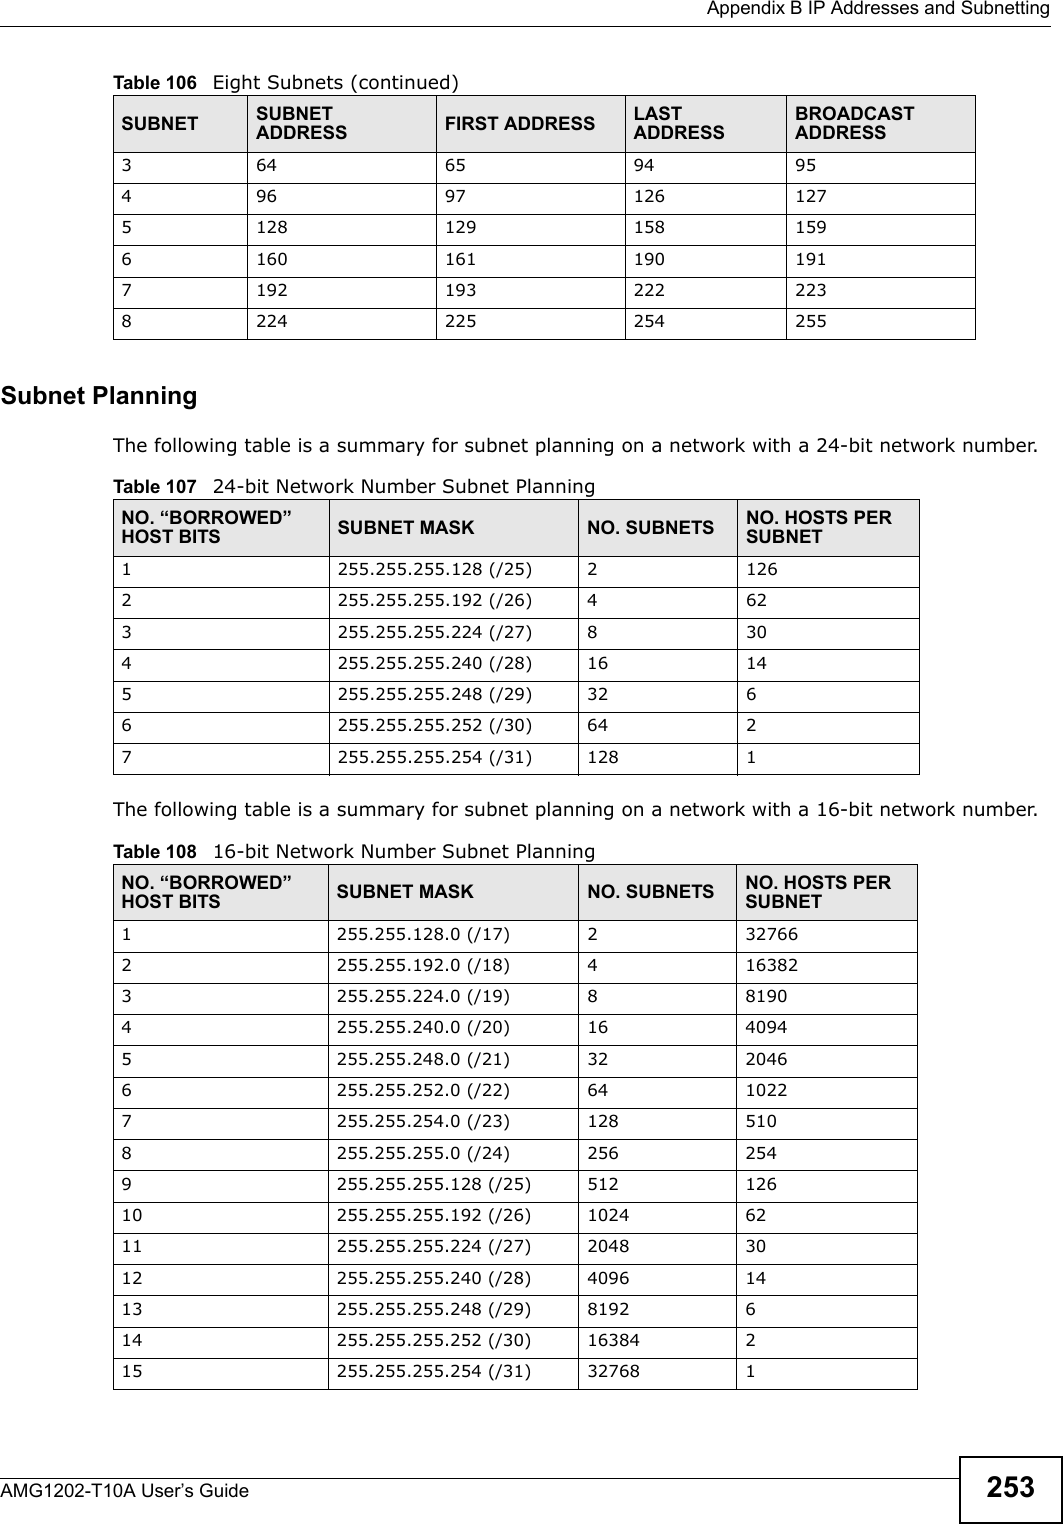  Appendix B IP Addresses and SubnettingAMG1202-T10A User’s Guide 253Subnet PlanningThe following table is a summary for subnet planning on a network with a 24-bit network number.The following table is a summary for subnet planning on a network with a 16-bit network number. 364 65 94 95496 97 126 1275128 129 158 1596160 161 190 1917192 193 222 2238224 225 254 255Table 106   Eight Subnets (continued)SUBNET SUBNET ADDRESS FIRST ADDRESS LAST ADDRESSBROADCAST ADDRESSTable 107   24-bit Network Number Subnet PlanningNO. “BORROWED” HOST BITS SUBNET MASK NO. SUBNETS NO. HOSTS PER SUBNET1255.255.255.128 (/25) 21262255.255.255.192 (/26) 4623255.255.255.224 (/27) 8304255.255.255.240 (/28) 16 145255.255.255.248 (/29) 32 66255.255.255.252 (/30) 64 27255.255.255.254 (/31) 128 1Table 108   16-bit Network Number Subnet PlanningNO. “BORROWED” HOST BITS SUBNET MASK NO. SUBNETS NO. HOSTS PER SUBNET1255.255.128.0 (/17) 2327662255.255.192.0 (/18) 4163823255.255.224.0 (/19) 881904255.255.240.0 (/20) 16 40945255.255.248.0 (/21) 32 20466255.255.252.0 (/22) 64 10227255.255.254.0 (/23) 128 5108255.255.255.0 (/24) 256 2549255.255.255.128 (/25) 512 12610 255.255.255.192 (/26) 1024 6211 255.255.255.224 (/27) 2048 3012 255.255.255.240 (/28) 4096 1413 255.255.255.248 (/29) 8192 614 255.255.255.252 (/30) 16384 215 255.255.255.254 (/31) 32768 1